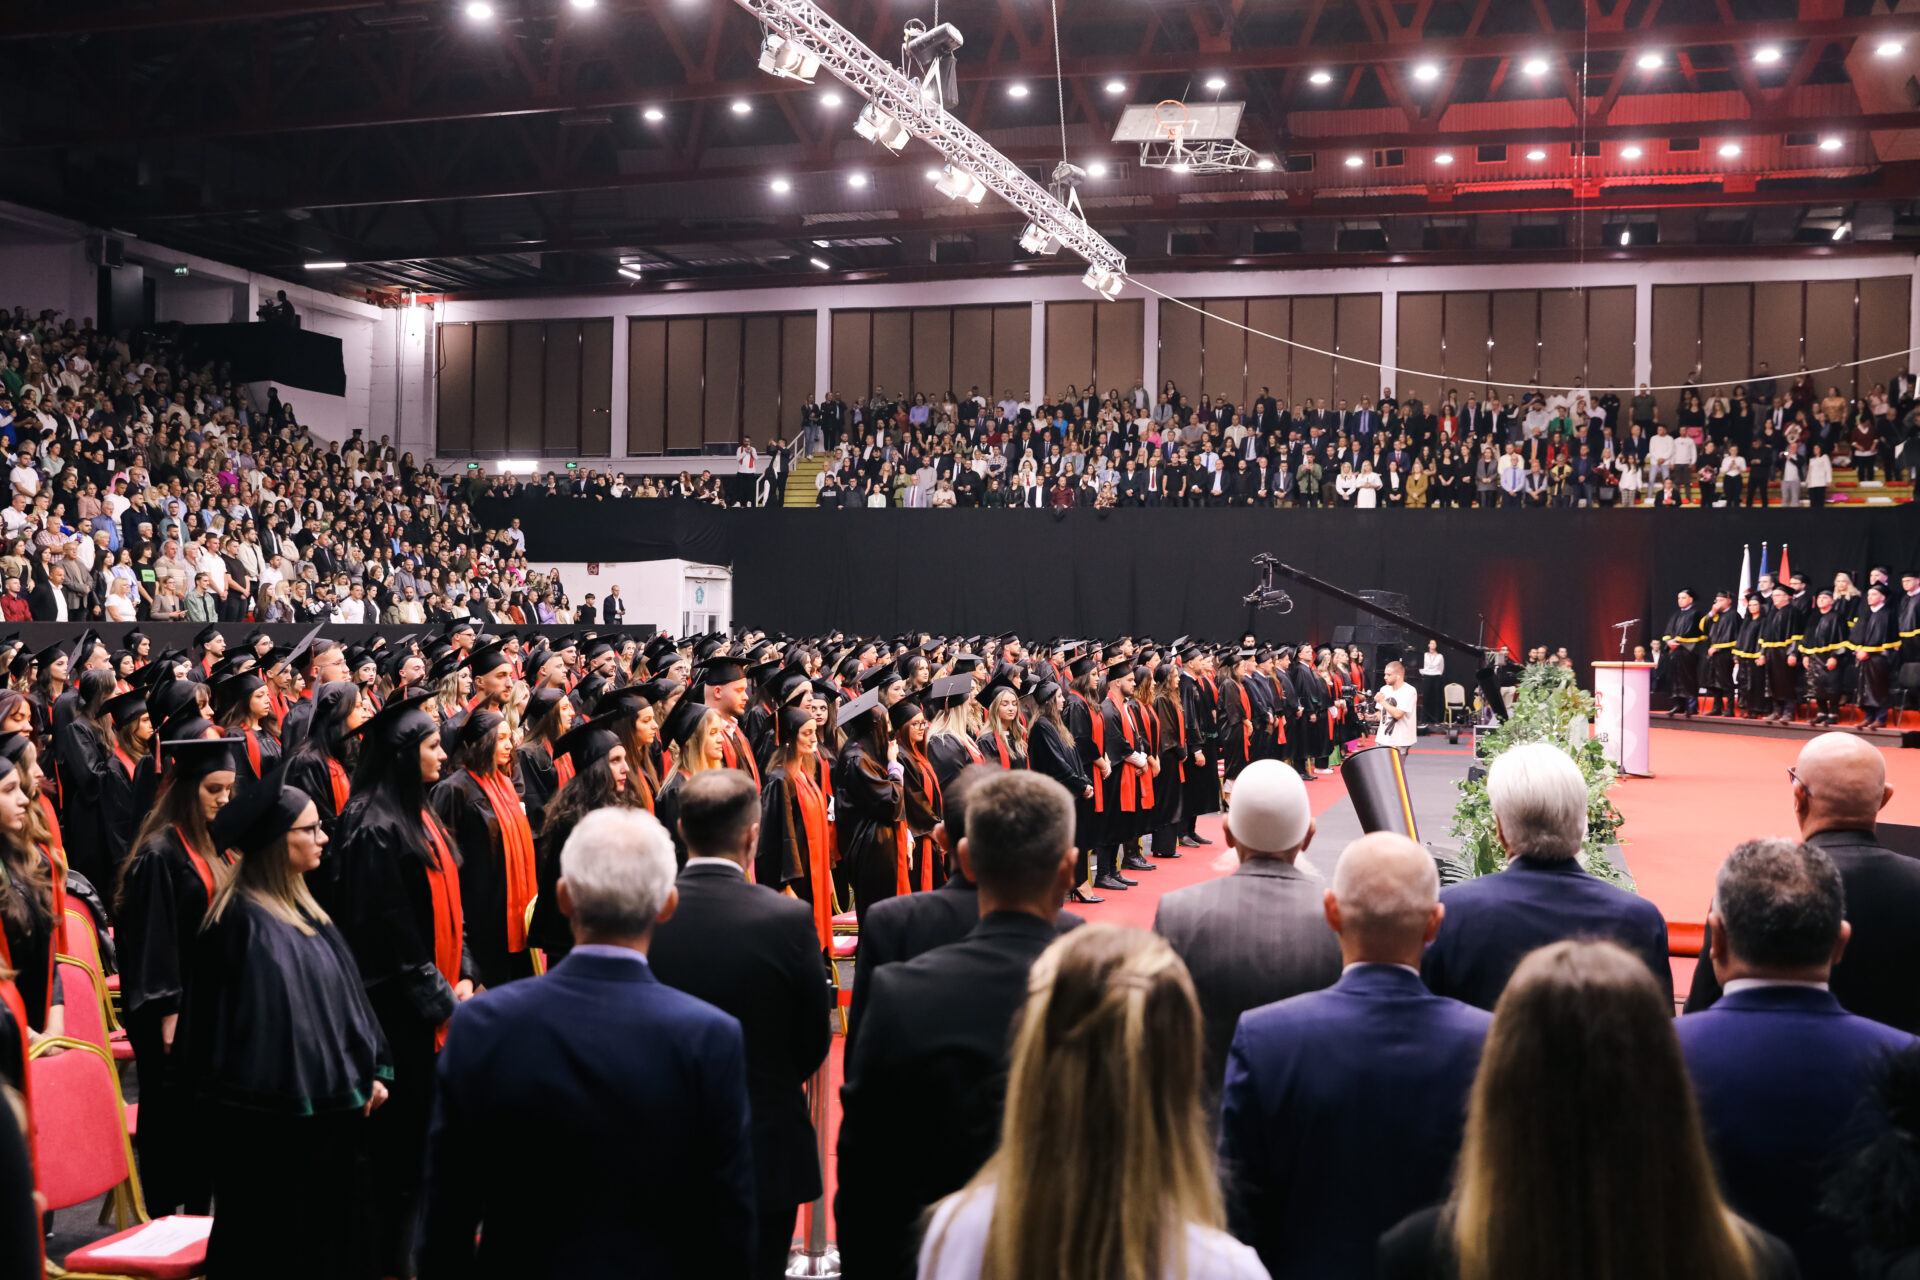 With a unique and magnificent organization, the Graduation Ceremony of AAB College is held